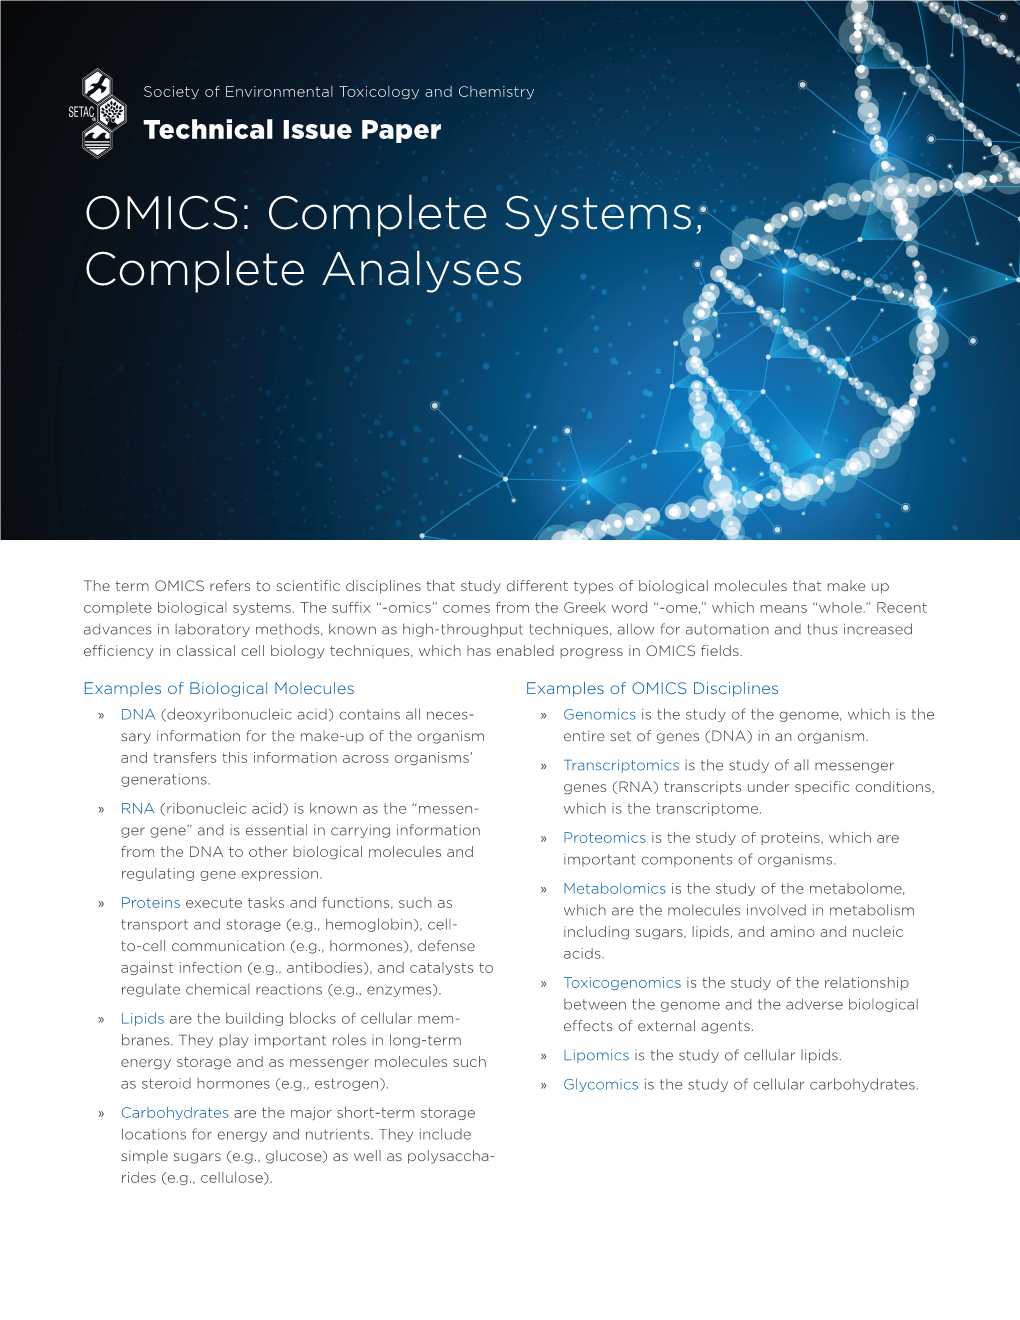 OMICS: Complete Systems, Complete Analyses